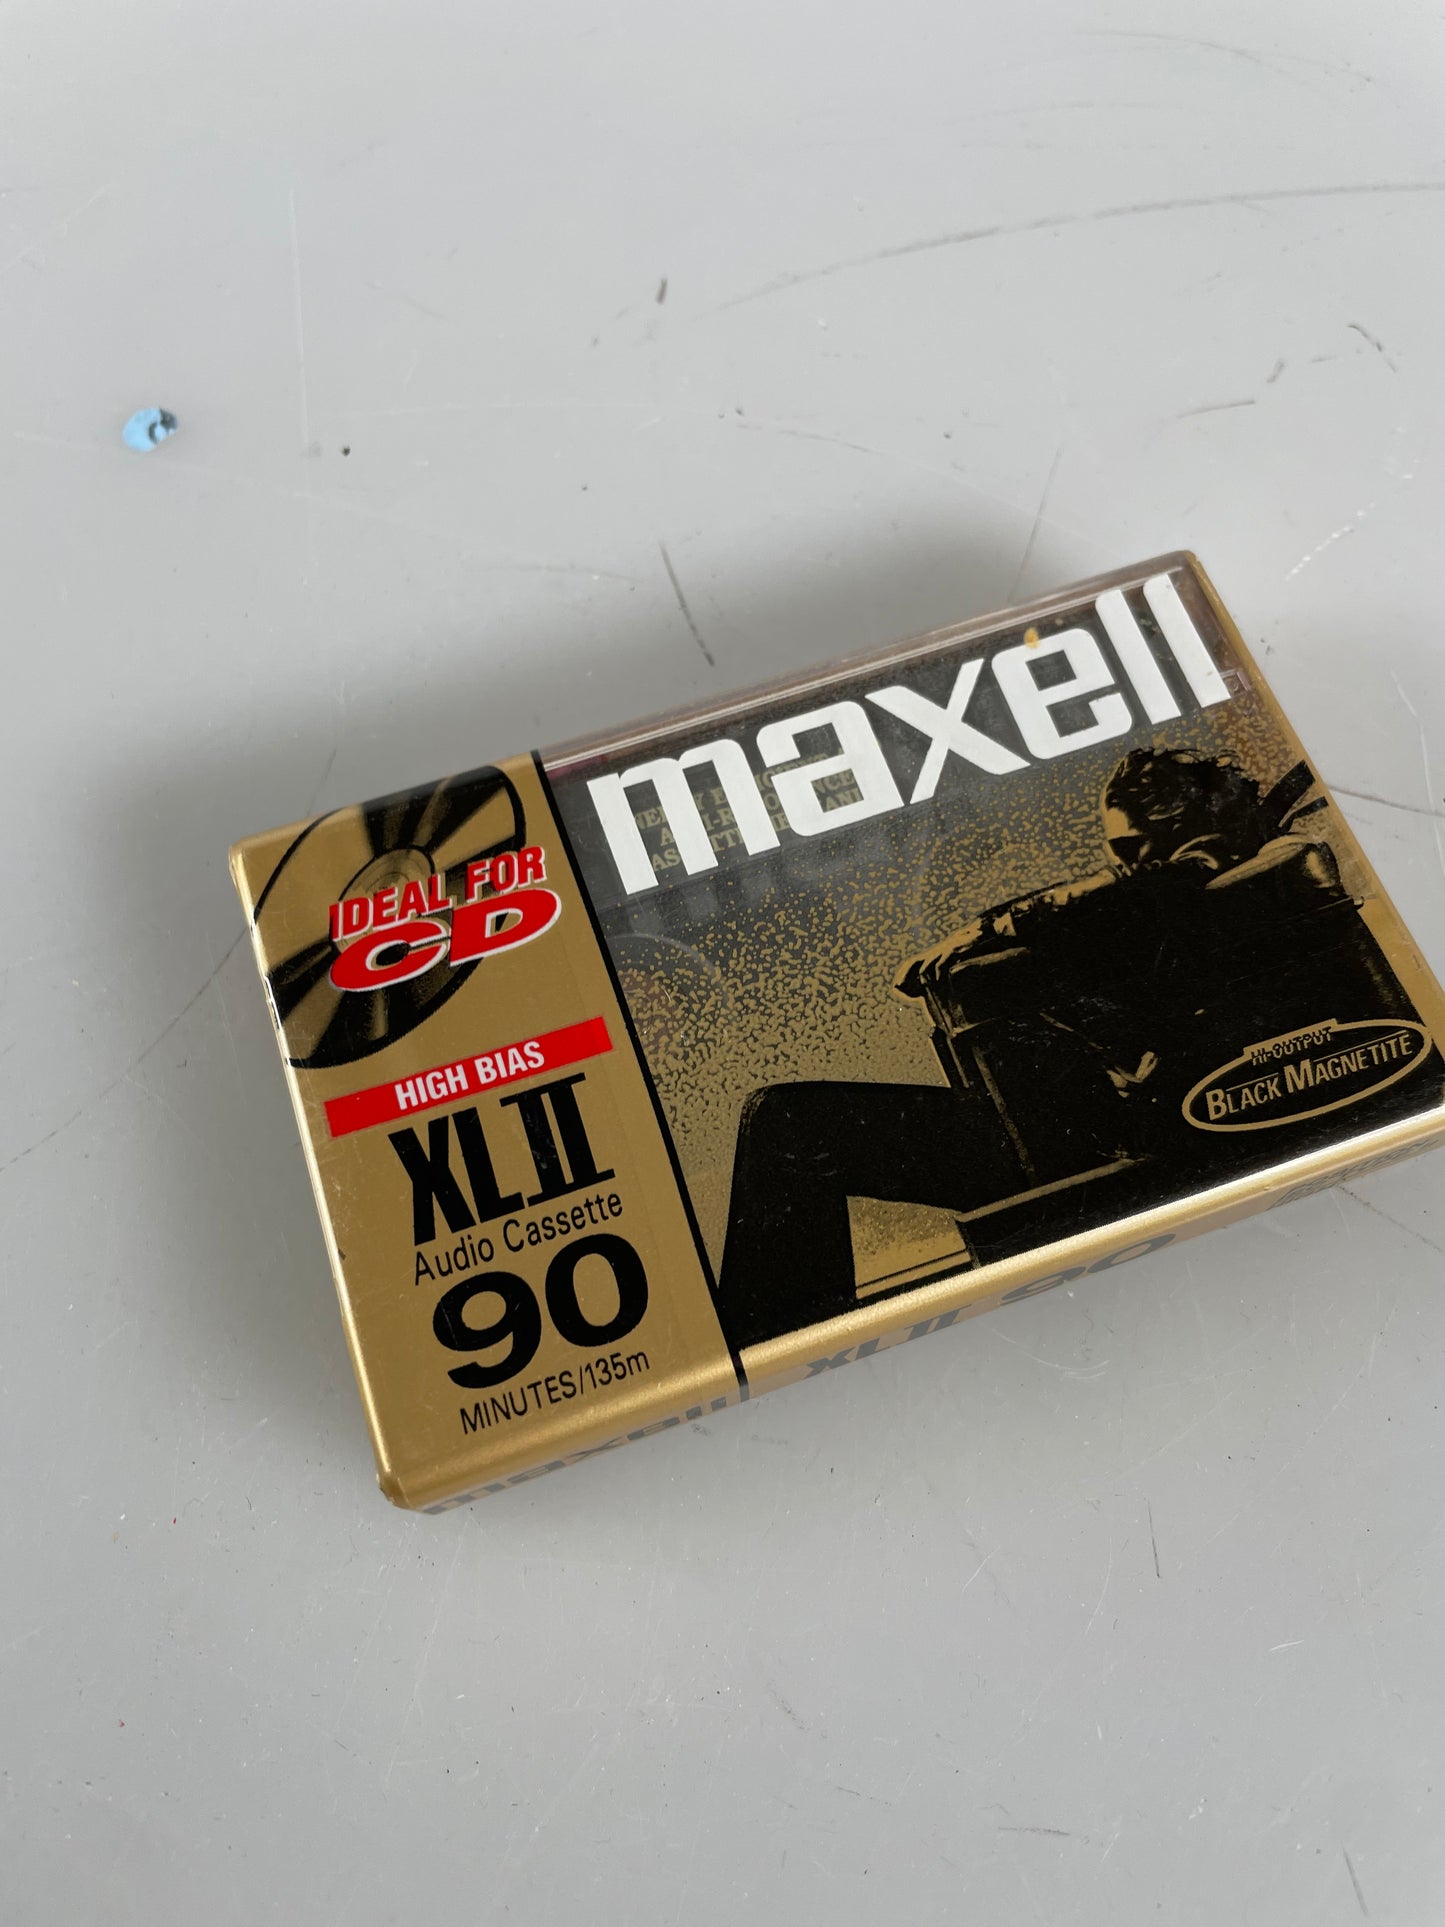 Maxell XLII 90 Min Type II High Bias Cassette Tapes